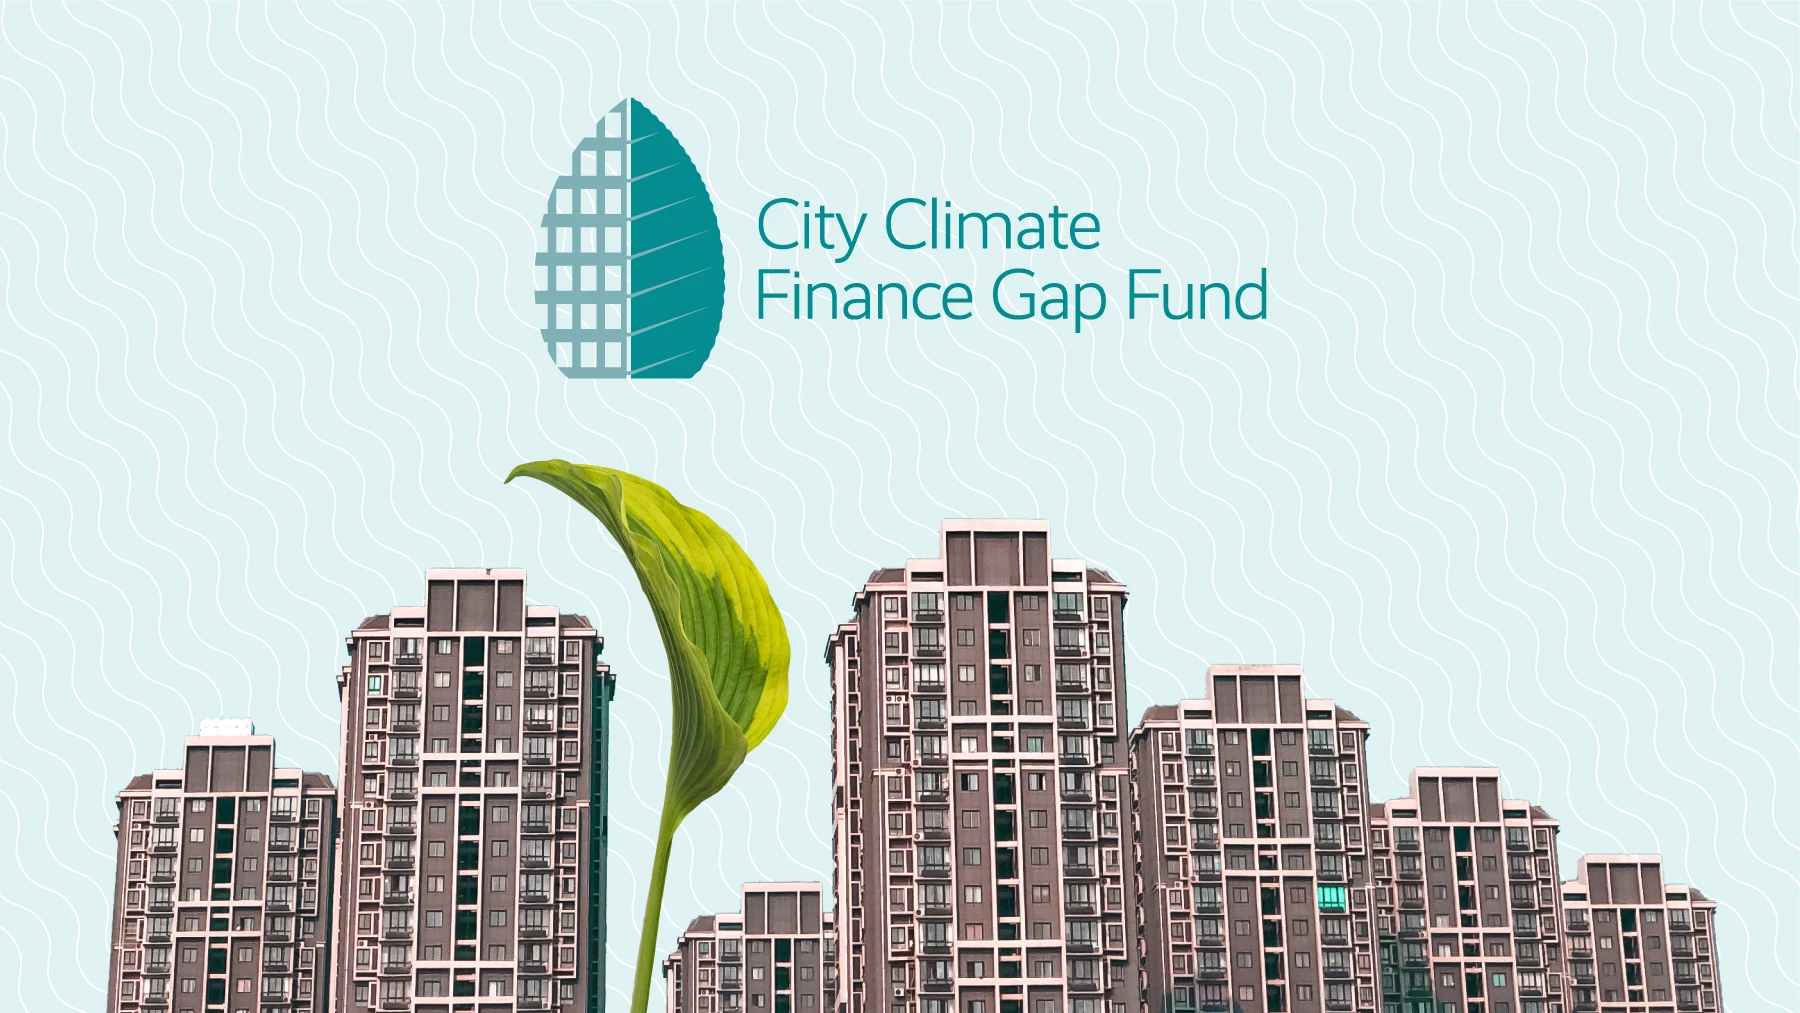 The World Bank and EIB joined partners to begin operation of the City Climate Finance Gap Fund